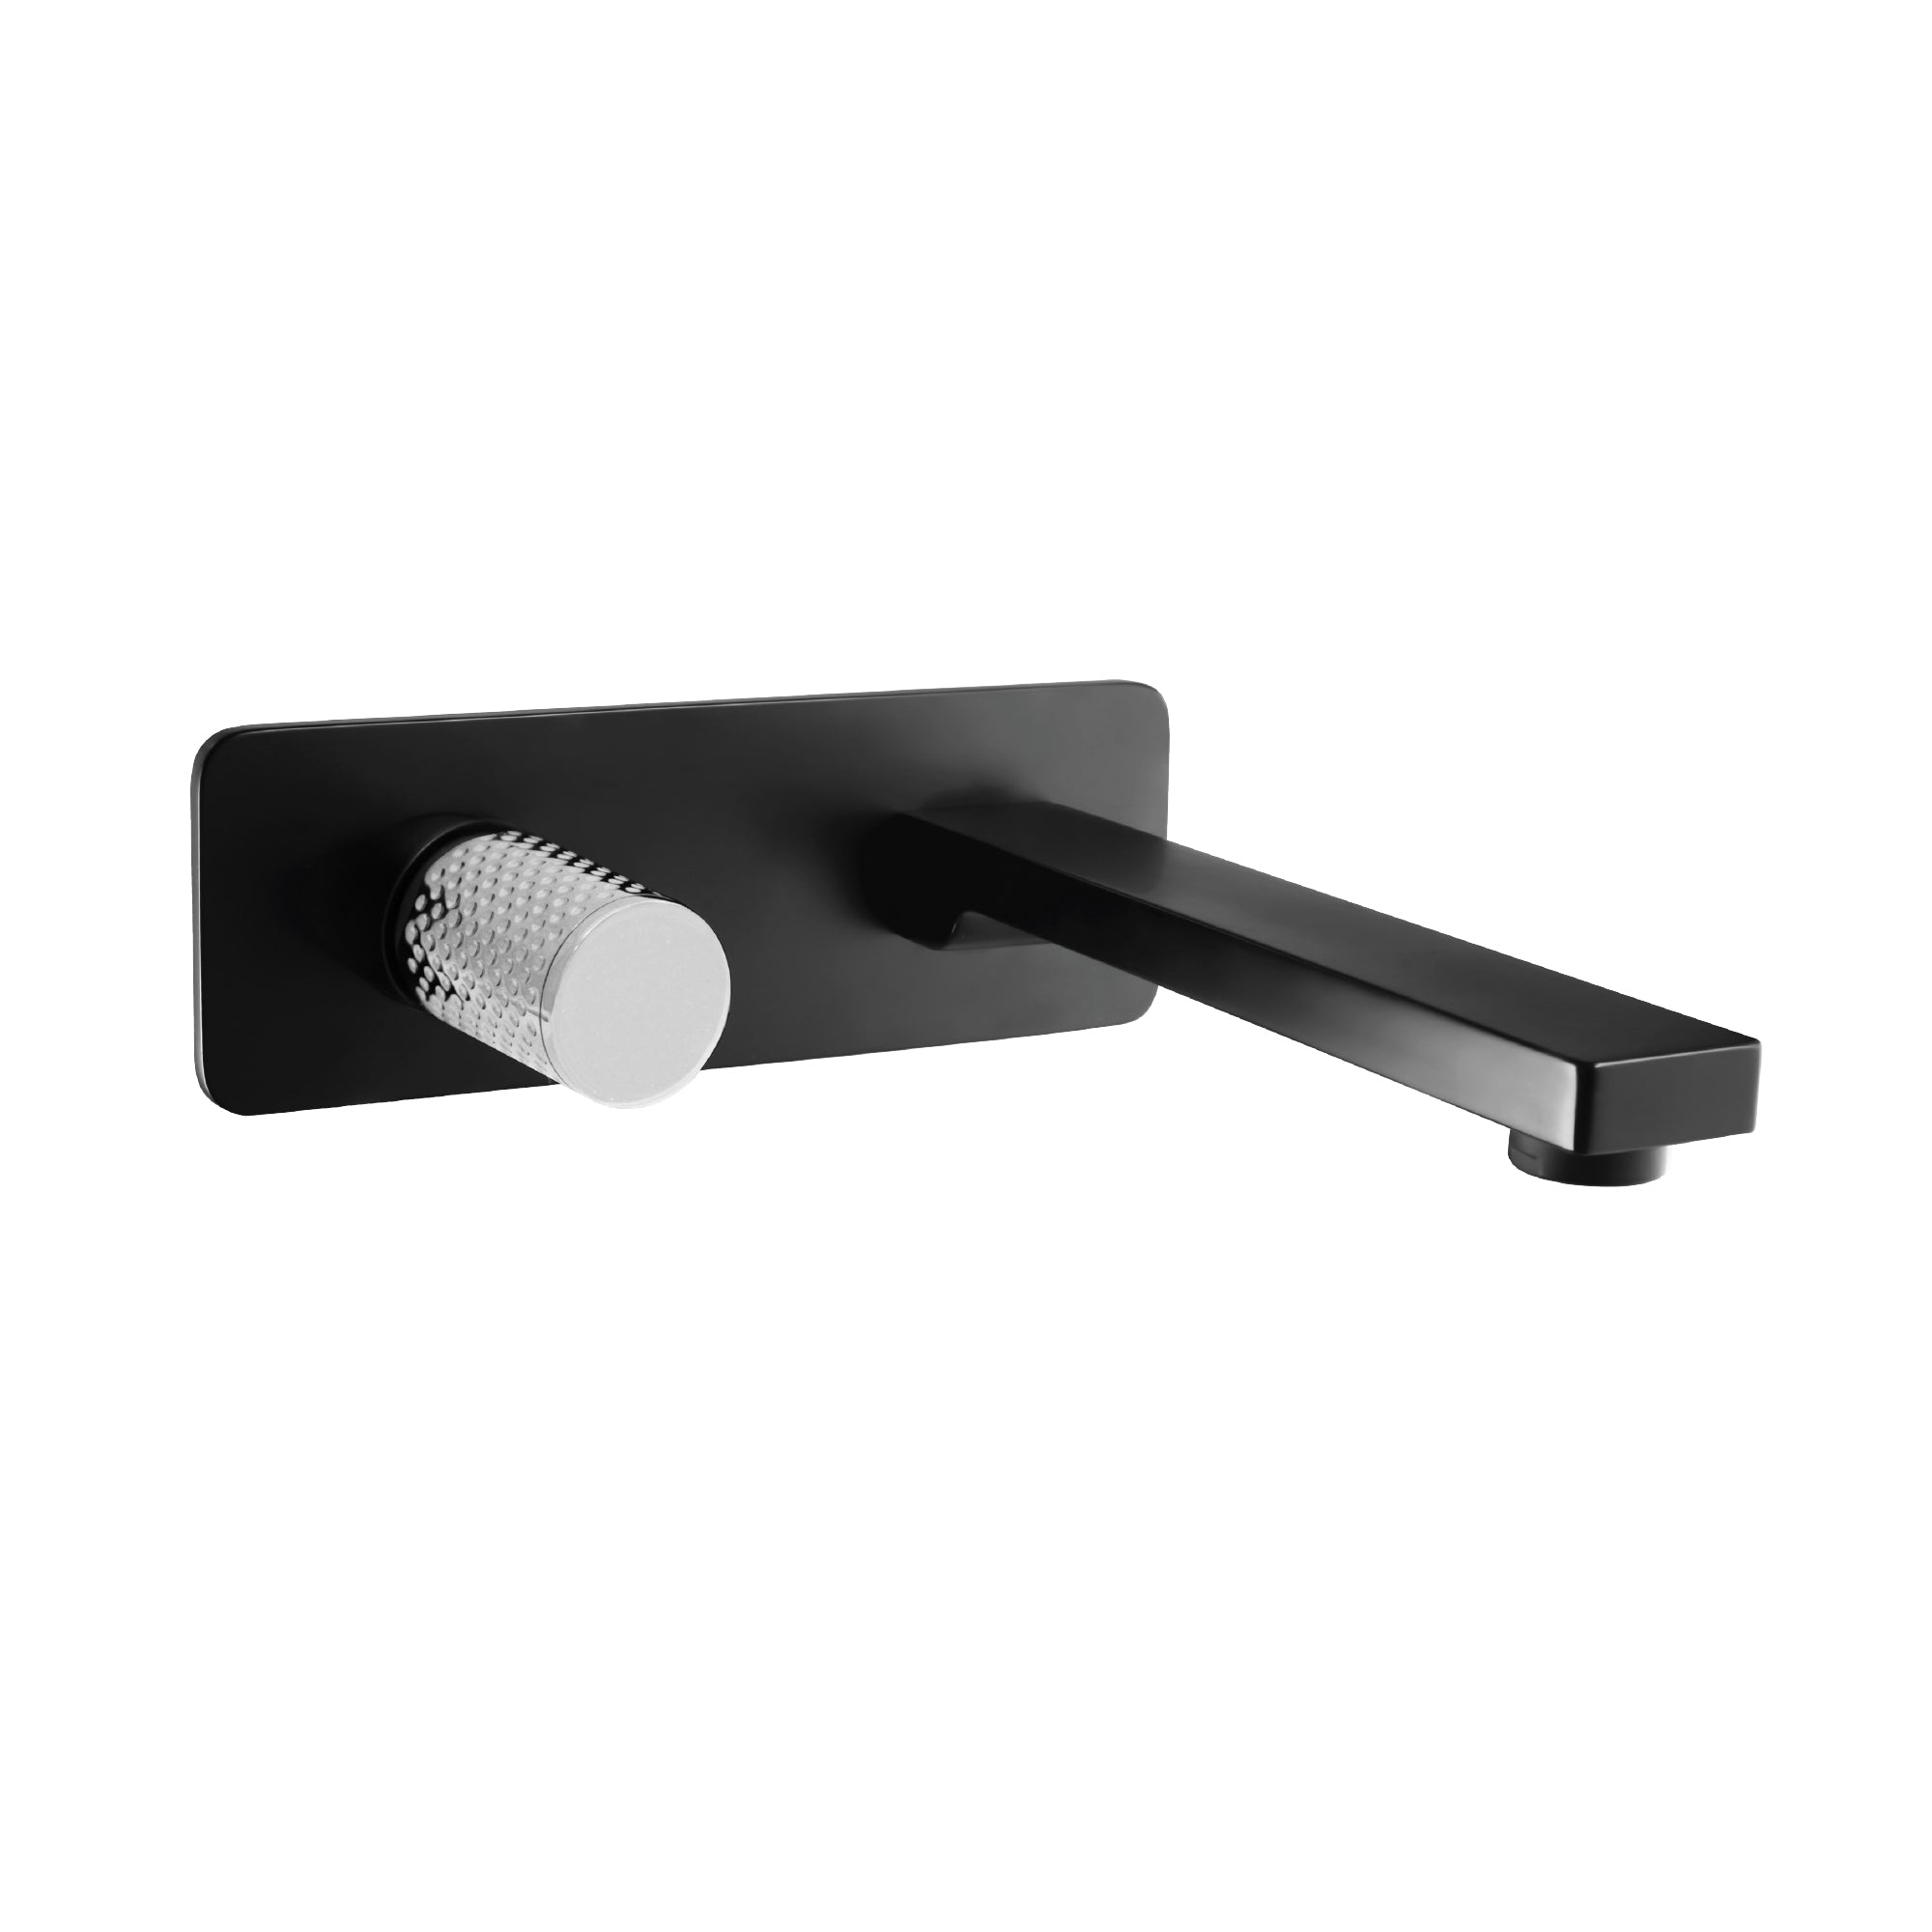 LINKWARE GABE WALL OUTLET MIXER MATTE BLACK AND CHROME